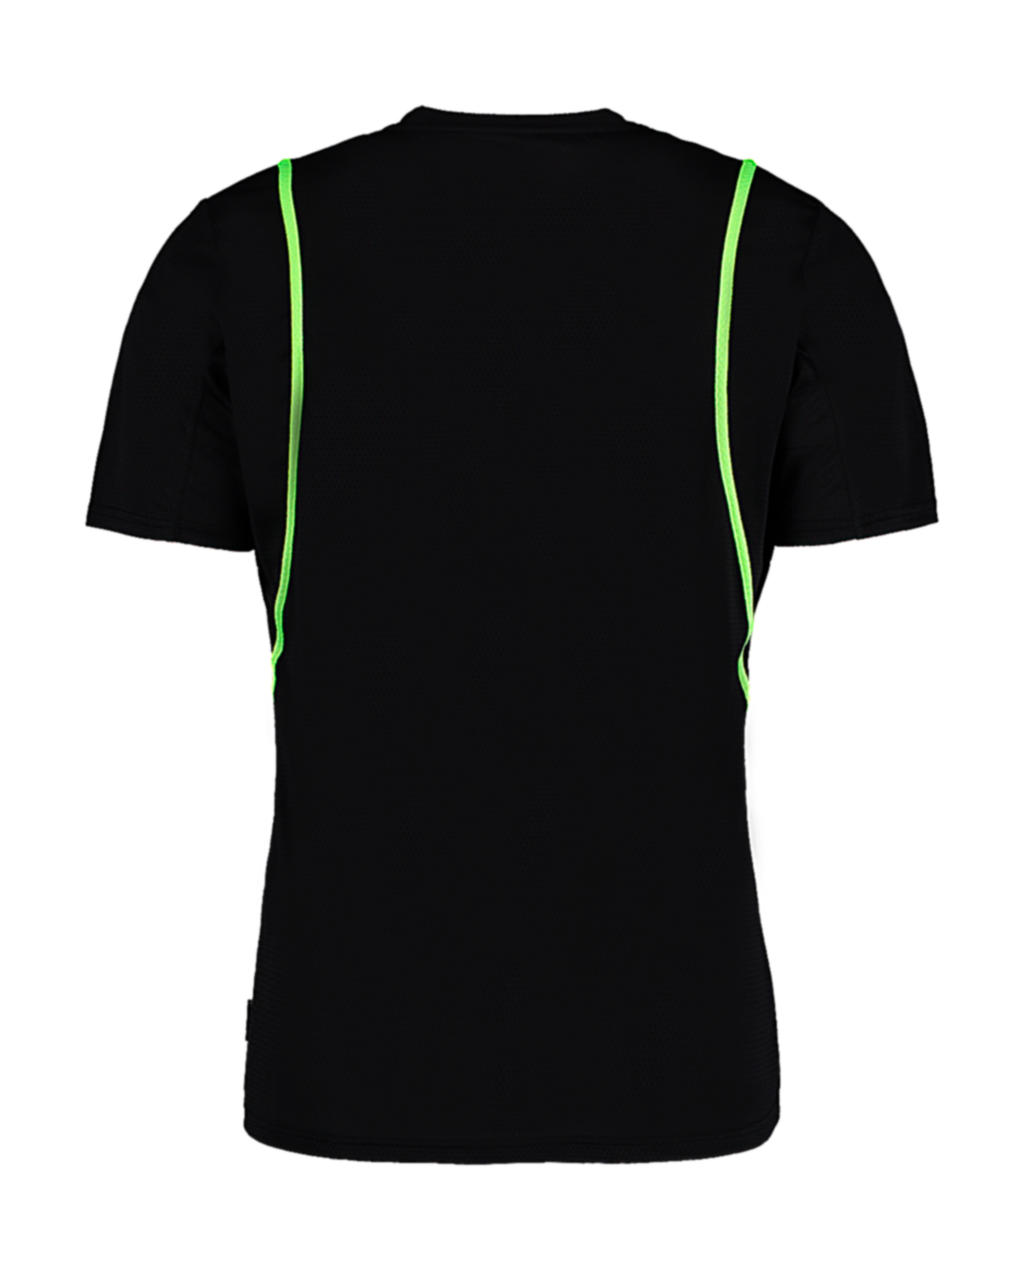  Regular Fit Cooltex? Contrast Tee in Farbe Black/Fluorescent Lime